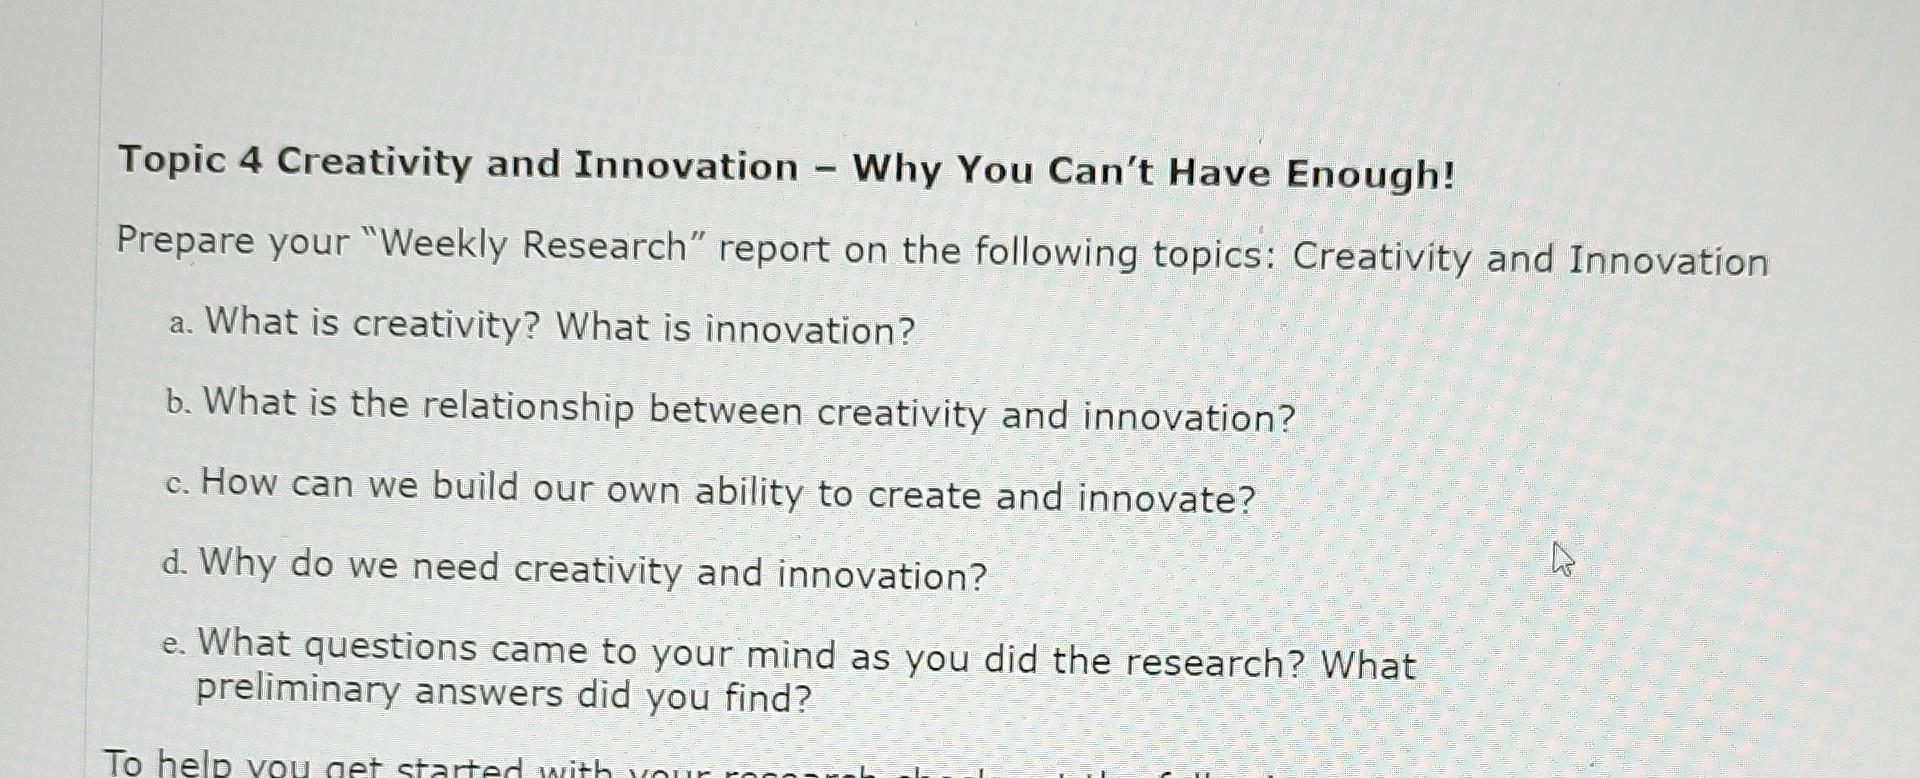 Topic 4 Creativity and Innovation - Why You Can't Have Enough! Prepare your 